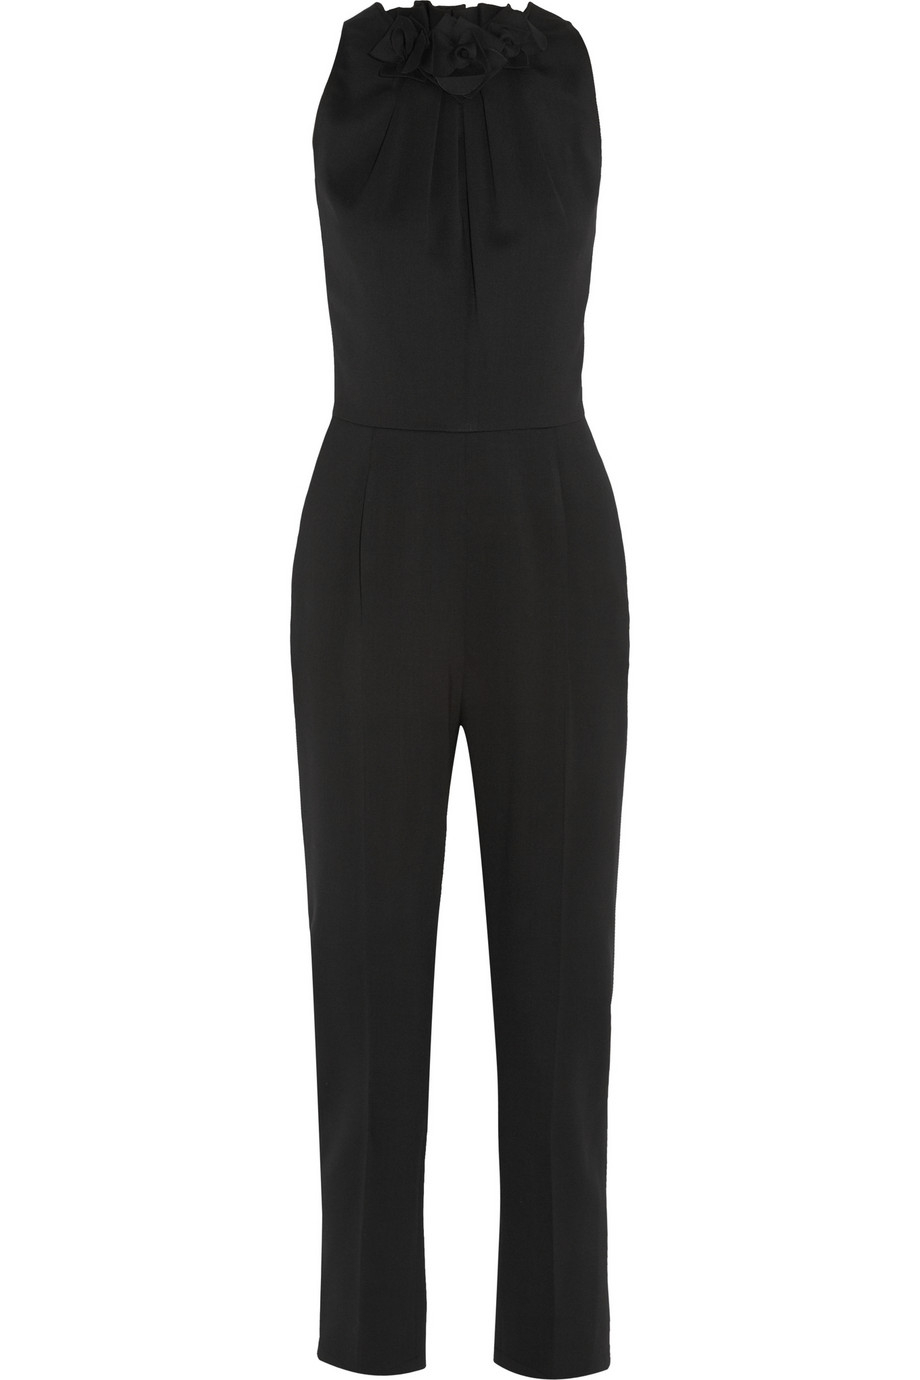 Valentino Rose-Detailed Stretch-Wool Crepe Jumpsuit in Black | Lyst